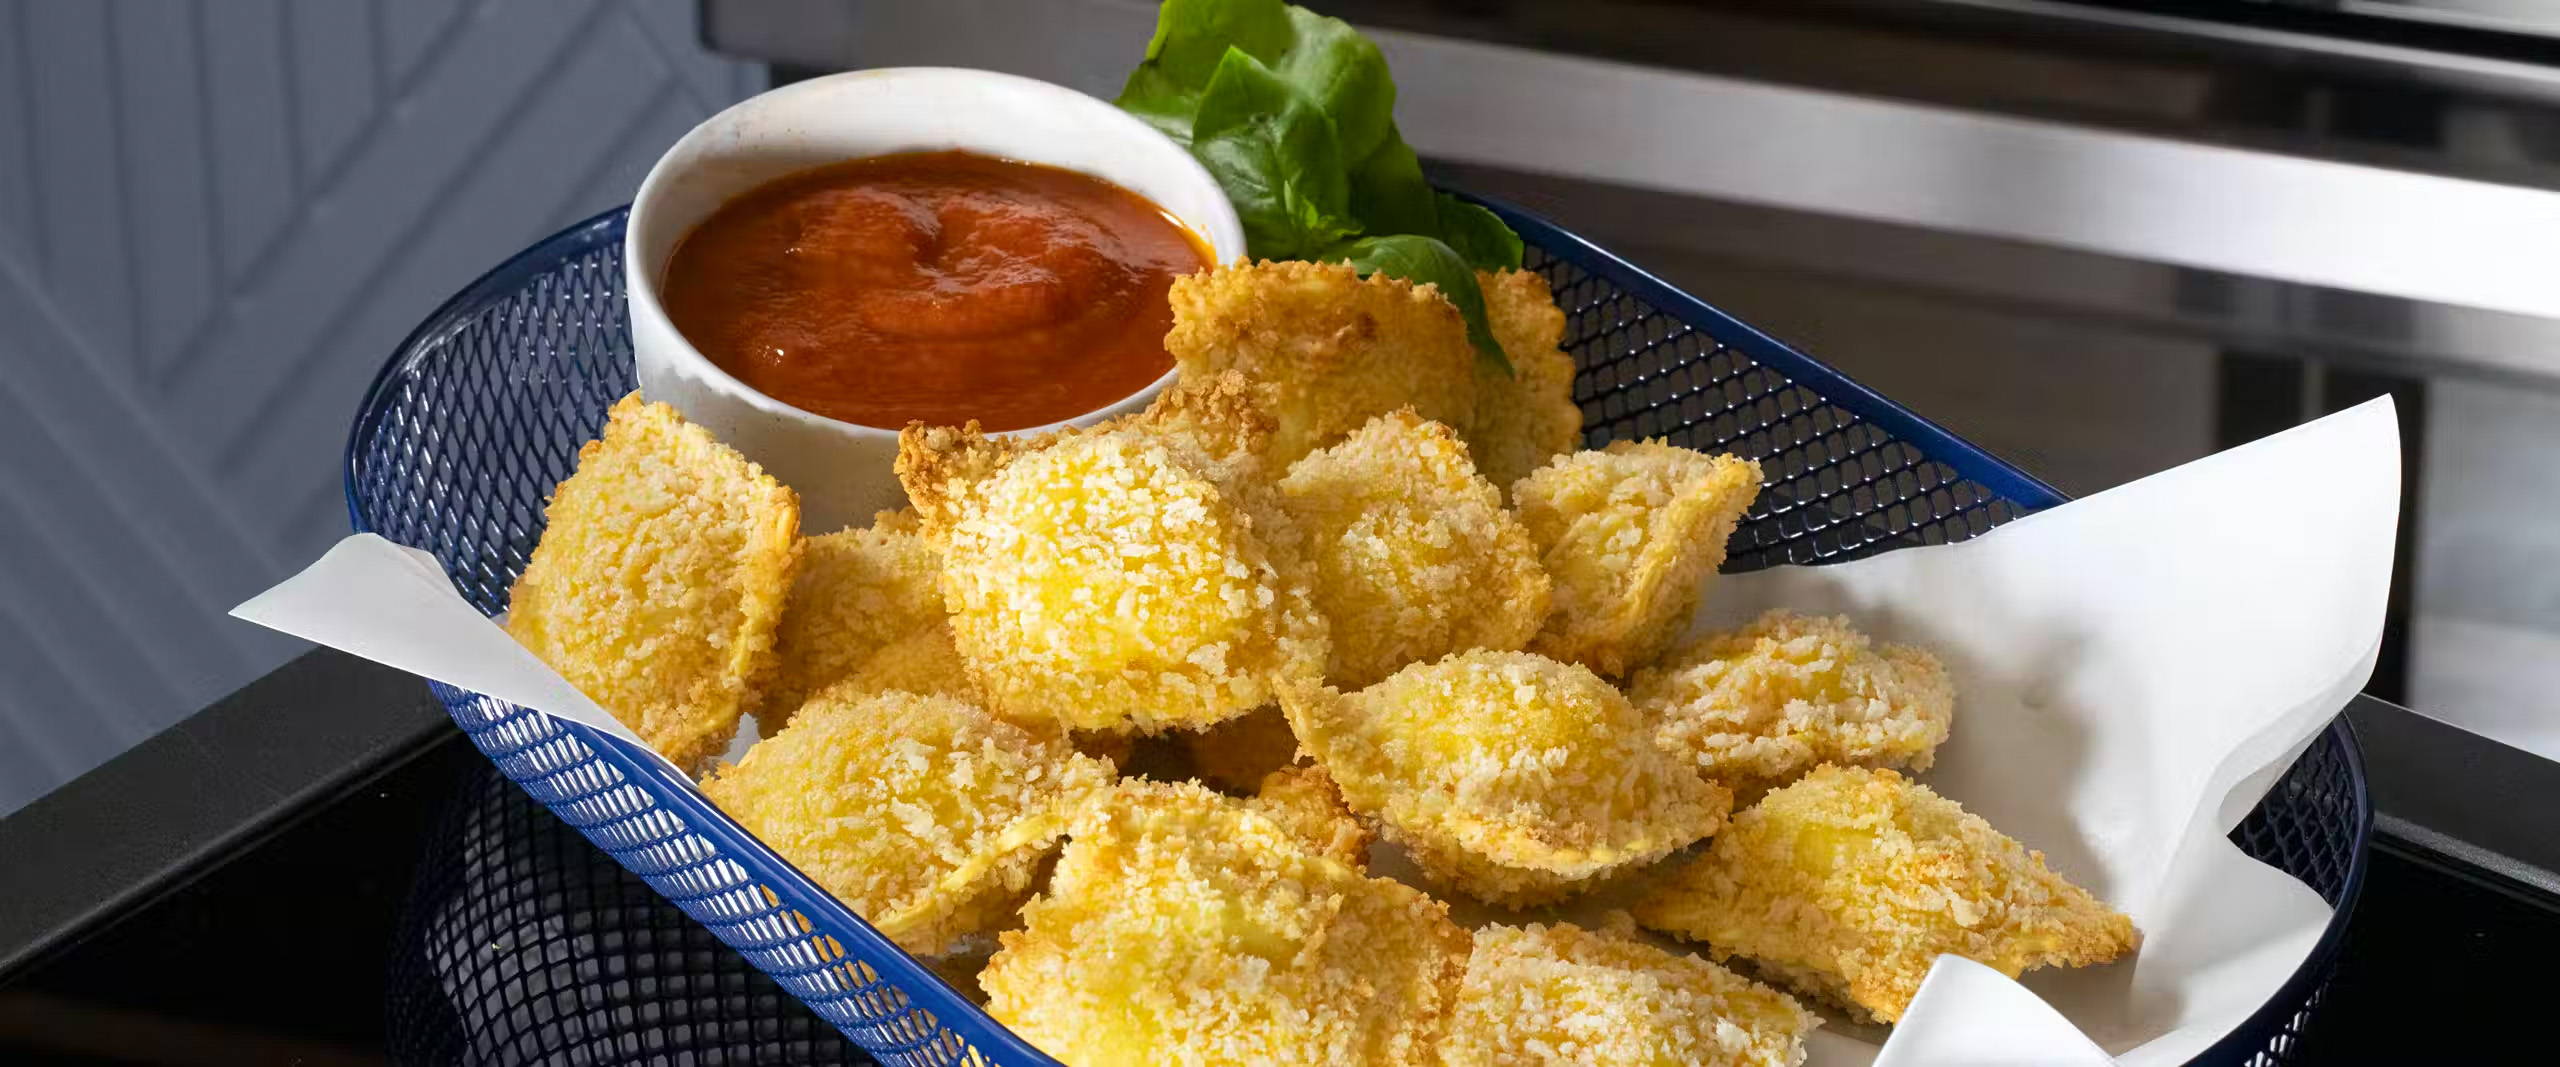 Fried ravioli in a basket with a side of dipping sauce